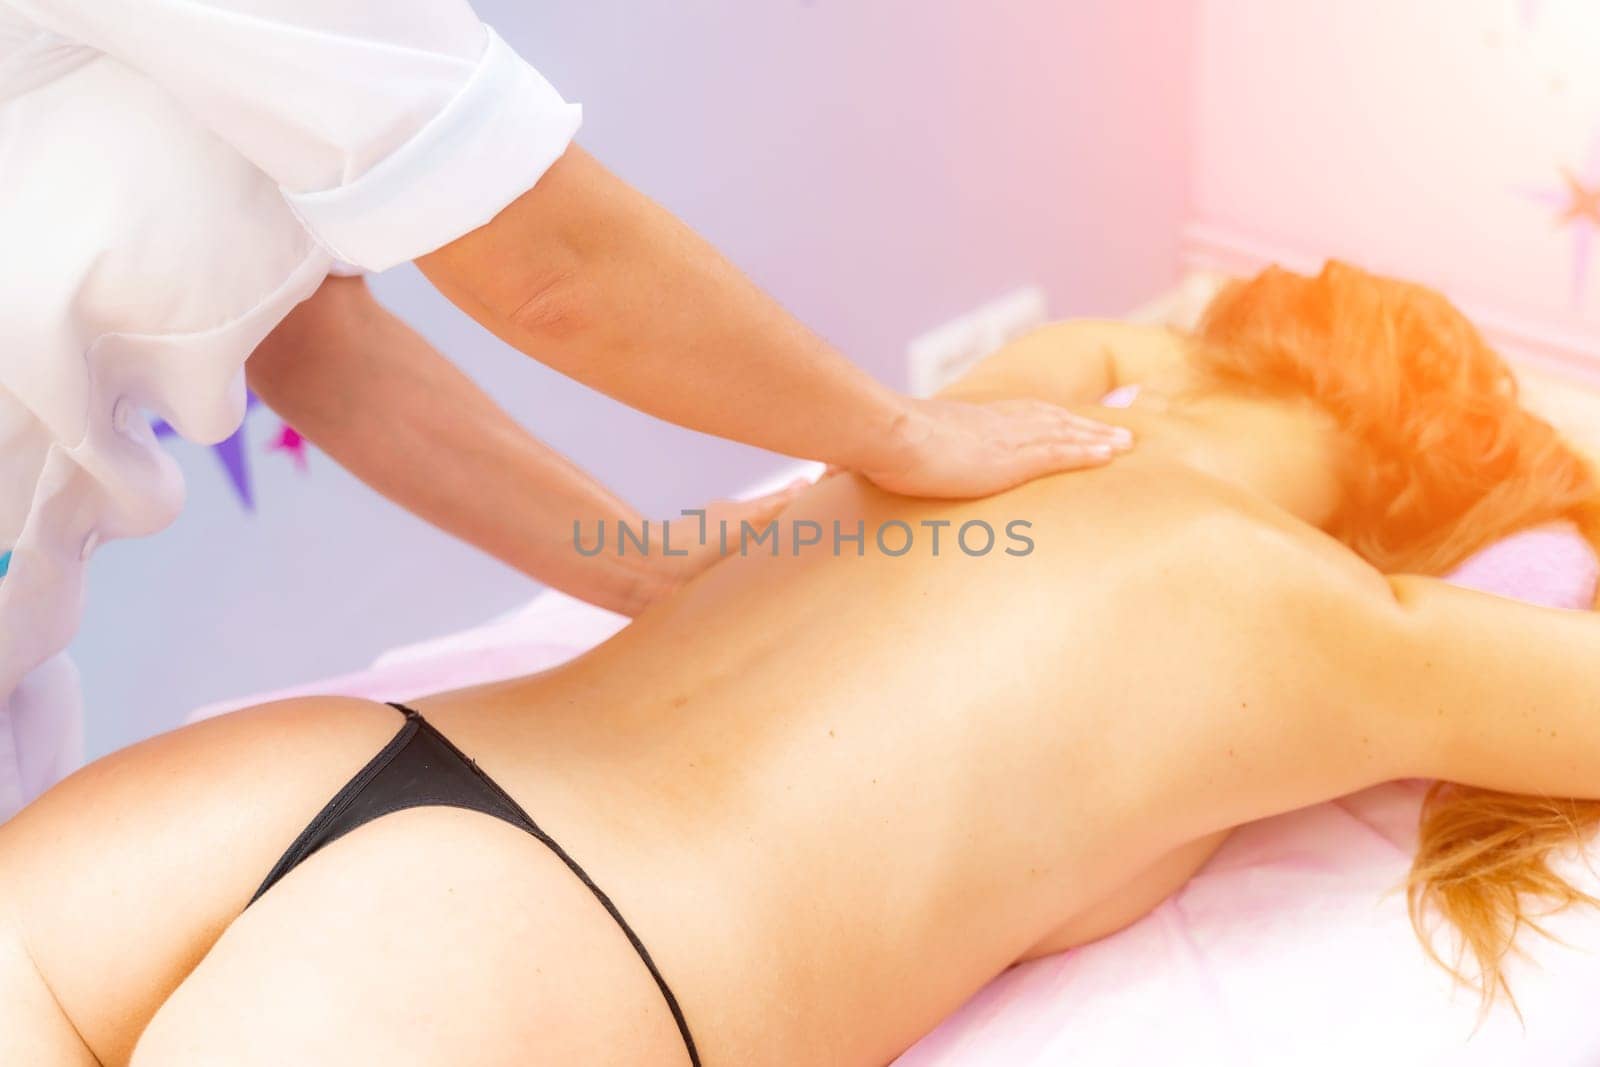 Facial massage. A woman is given a massage in a beauty salon. Close-up